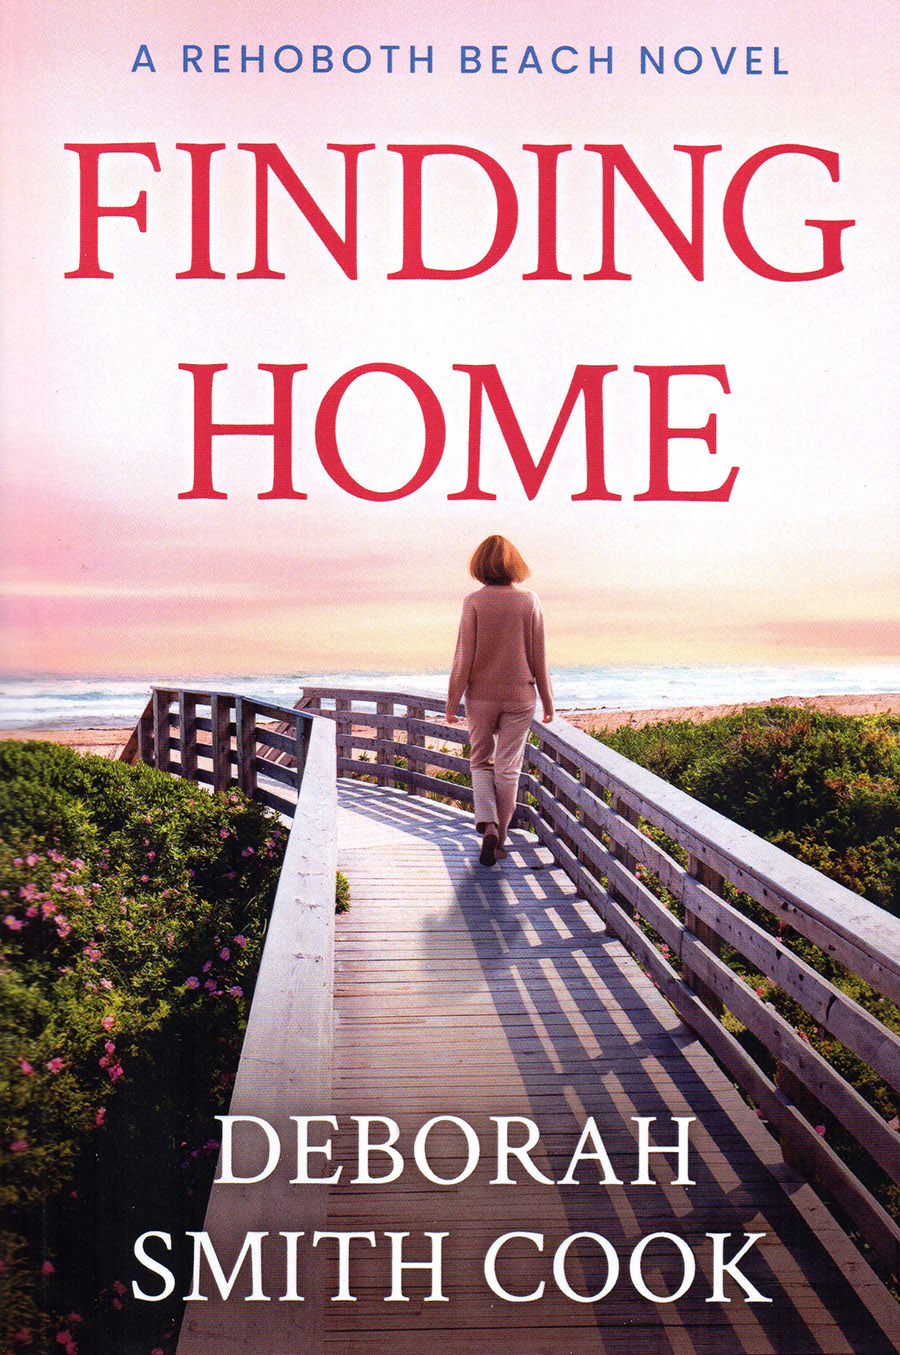 ExNotes Book Review:  Finding Home